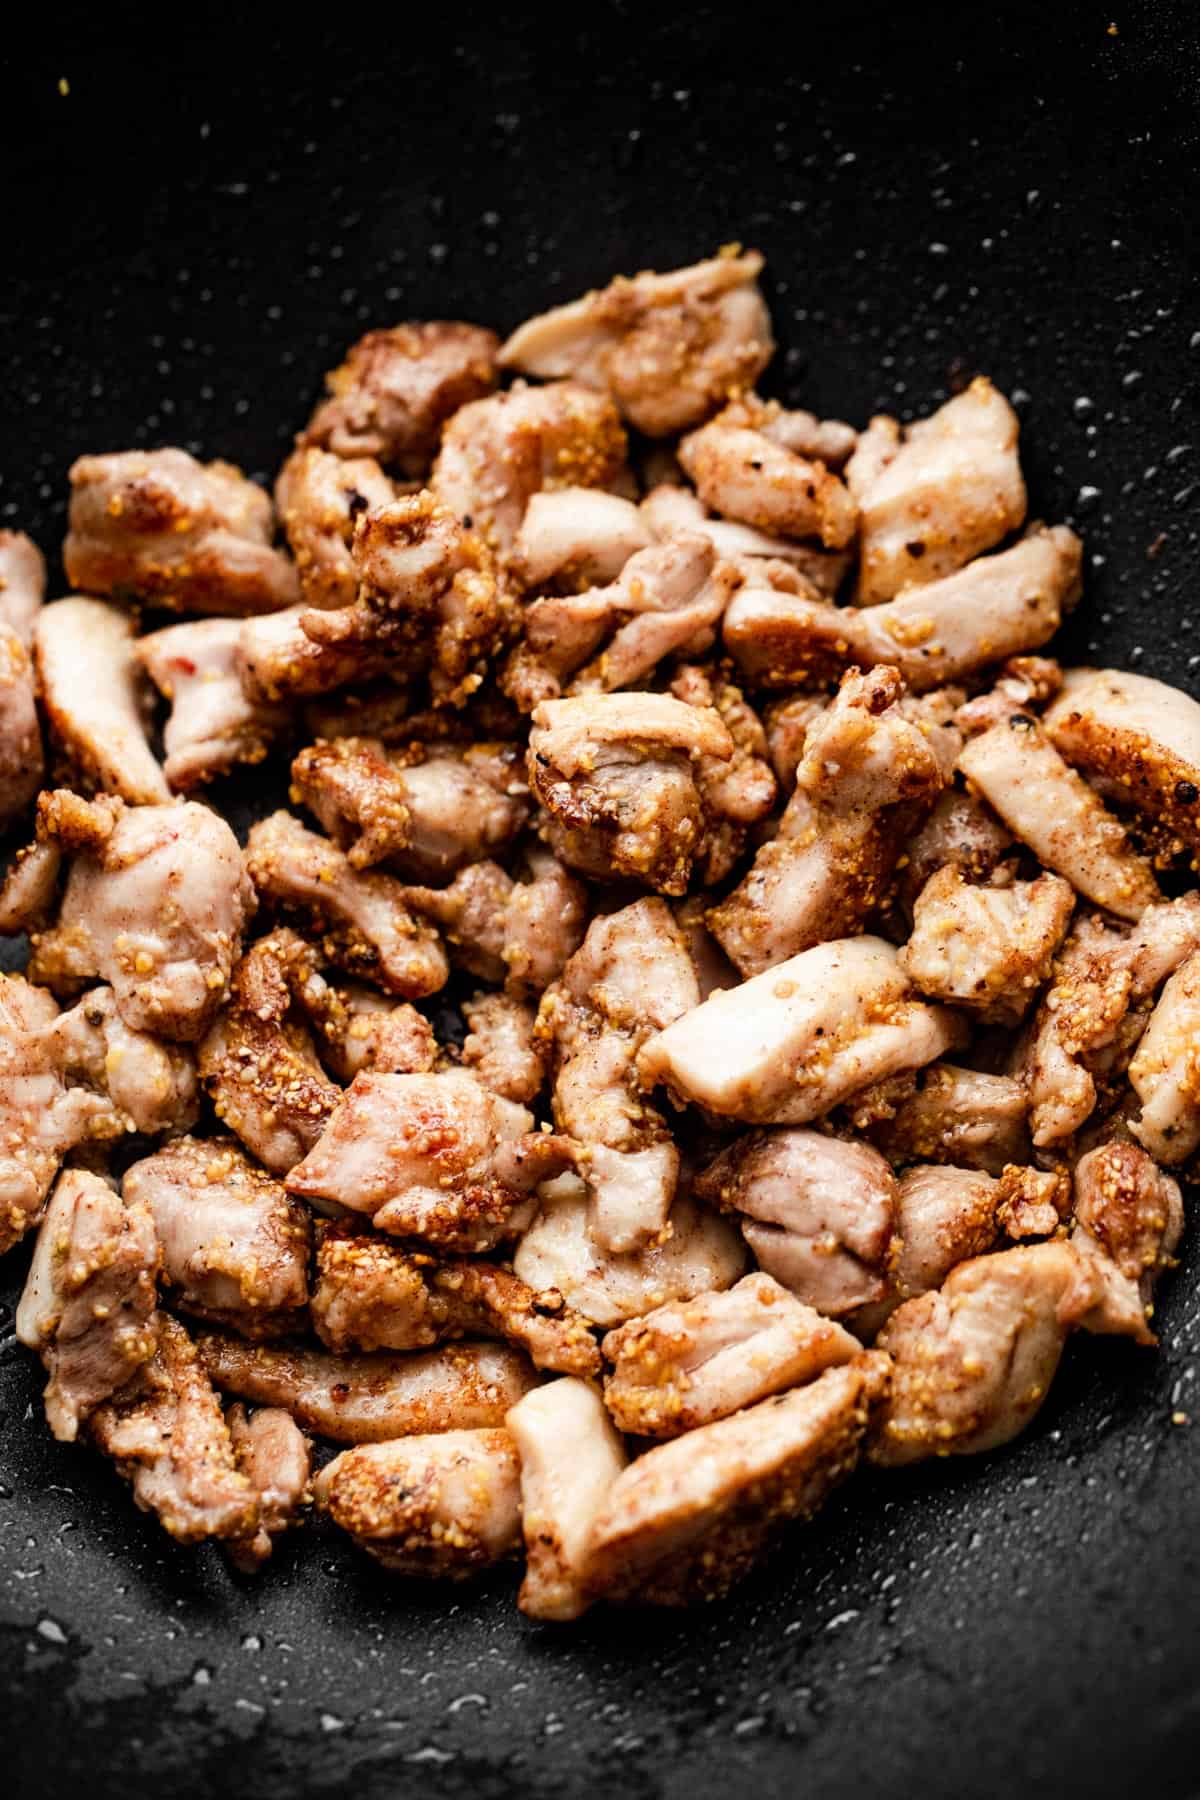 cooking cut up chicken thighs in a black wok.